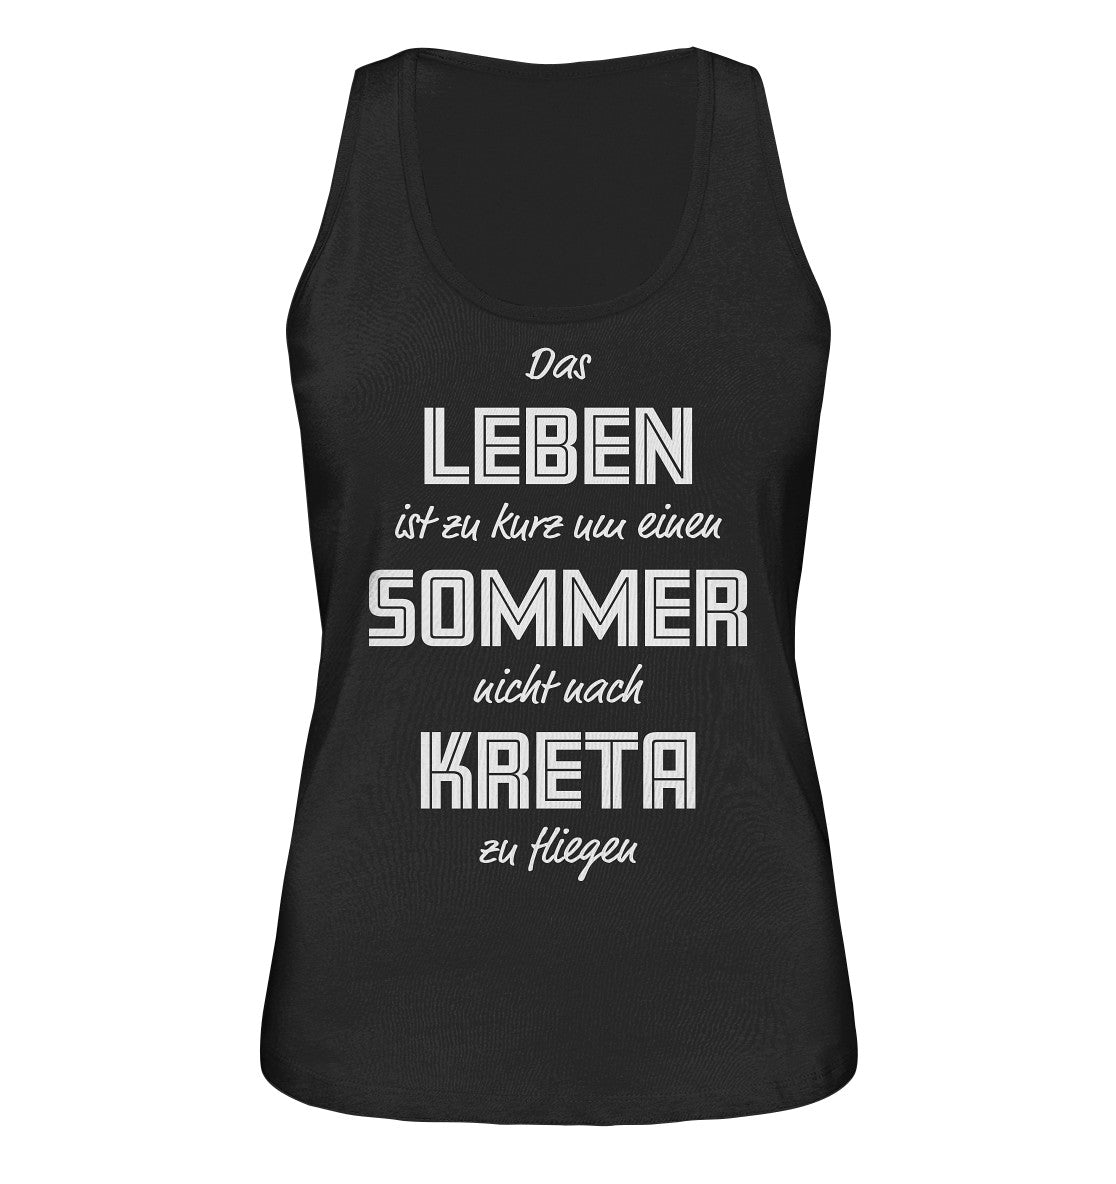 Life is too short not to fly to Crete for a summer - Ladies Organic Tank Top